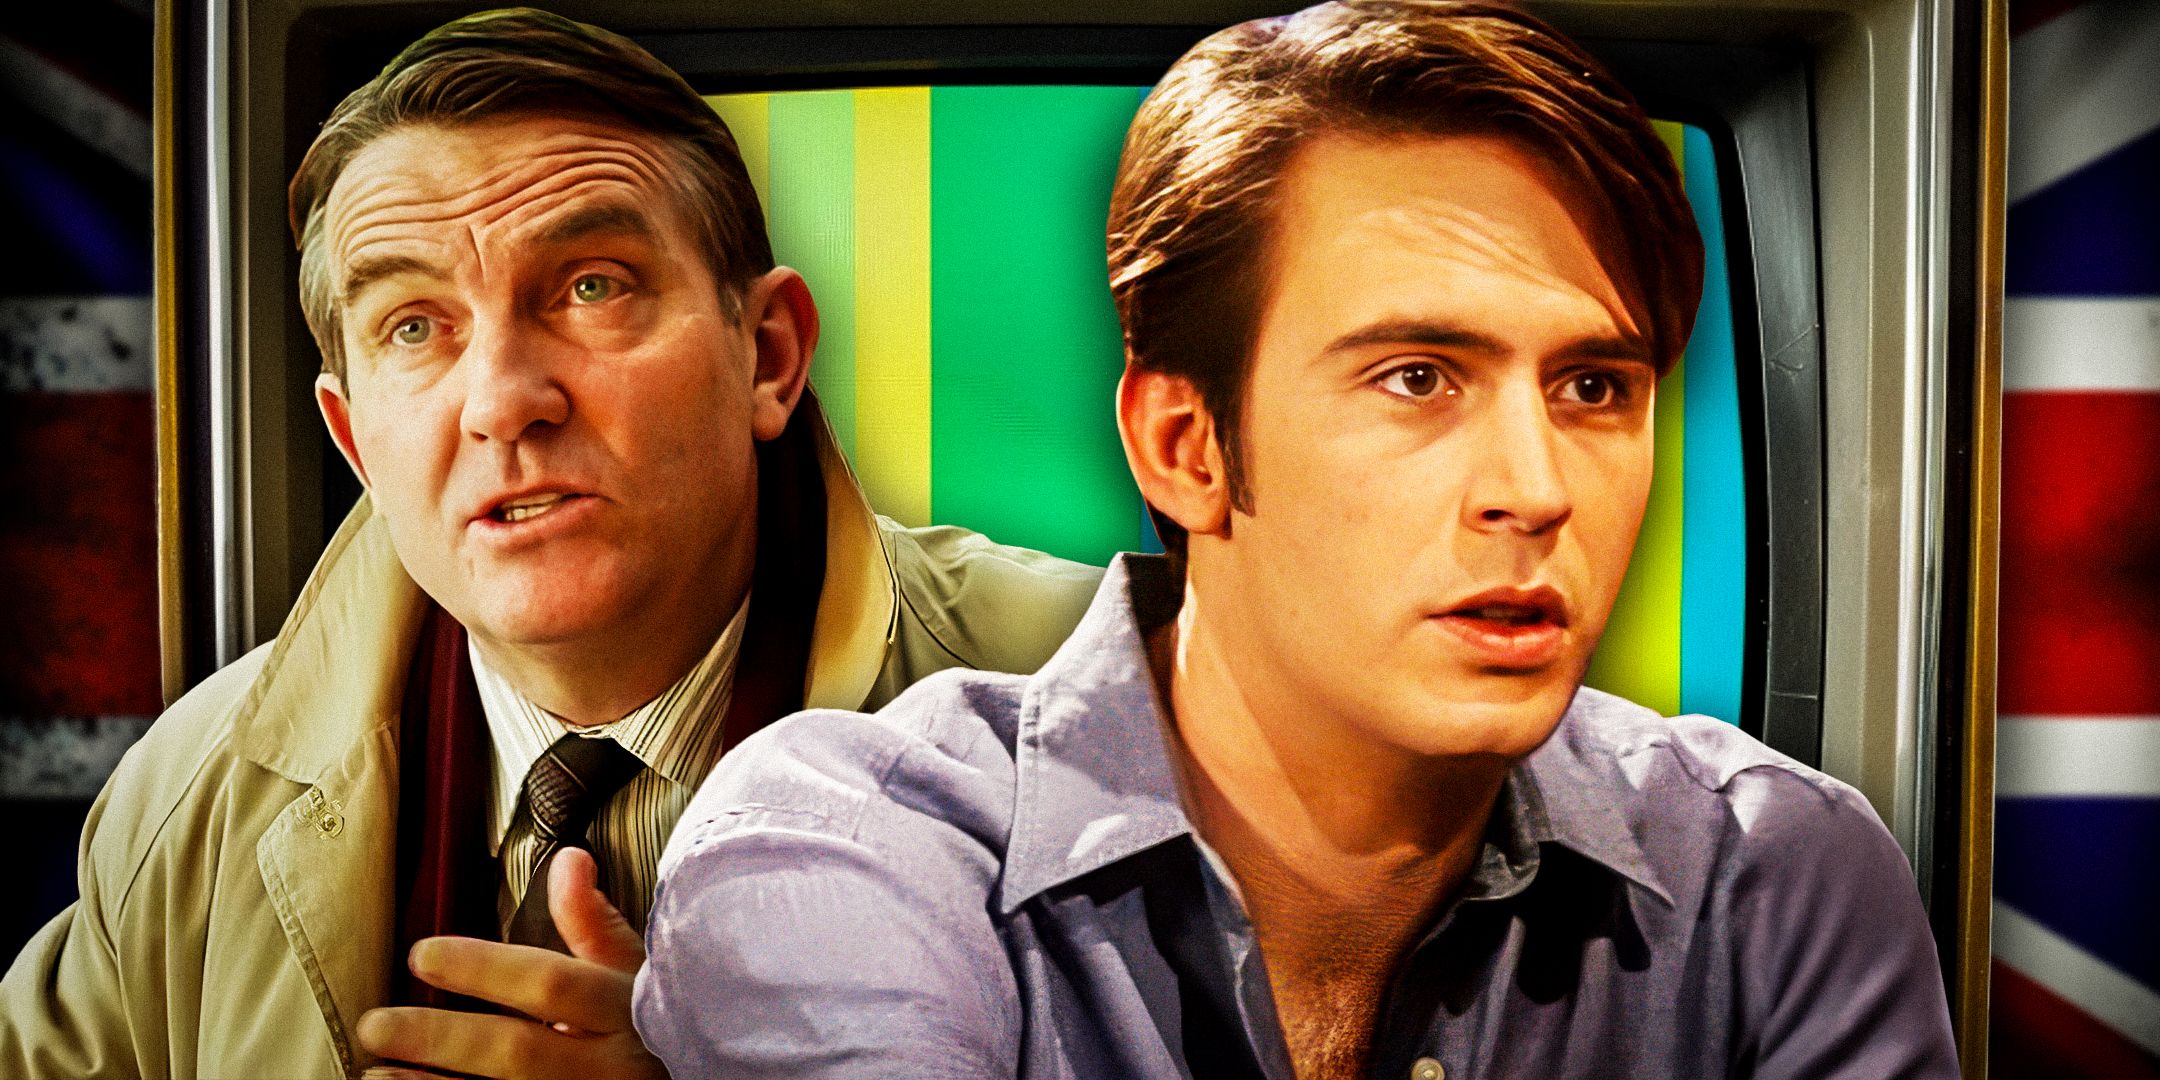 Ronnie-Brooks-from-Law-&-Order-UK)-and-(Jack-Davenport-as-Steve-Taylor)-from--Coupling